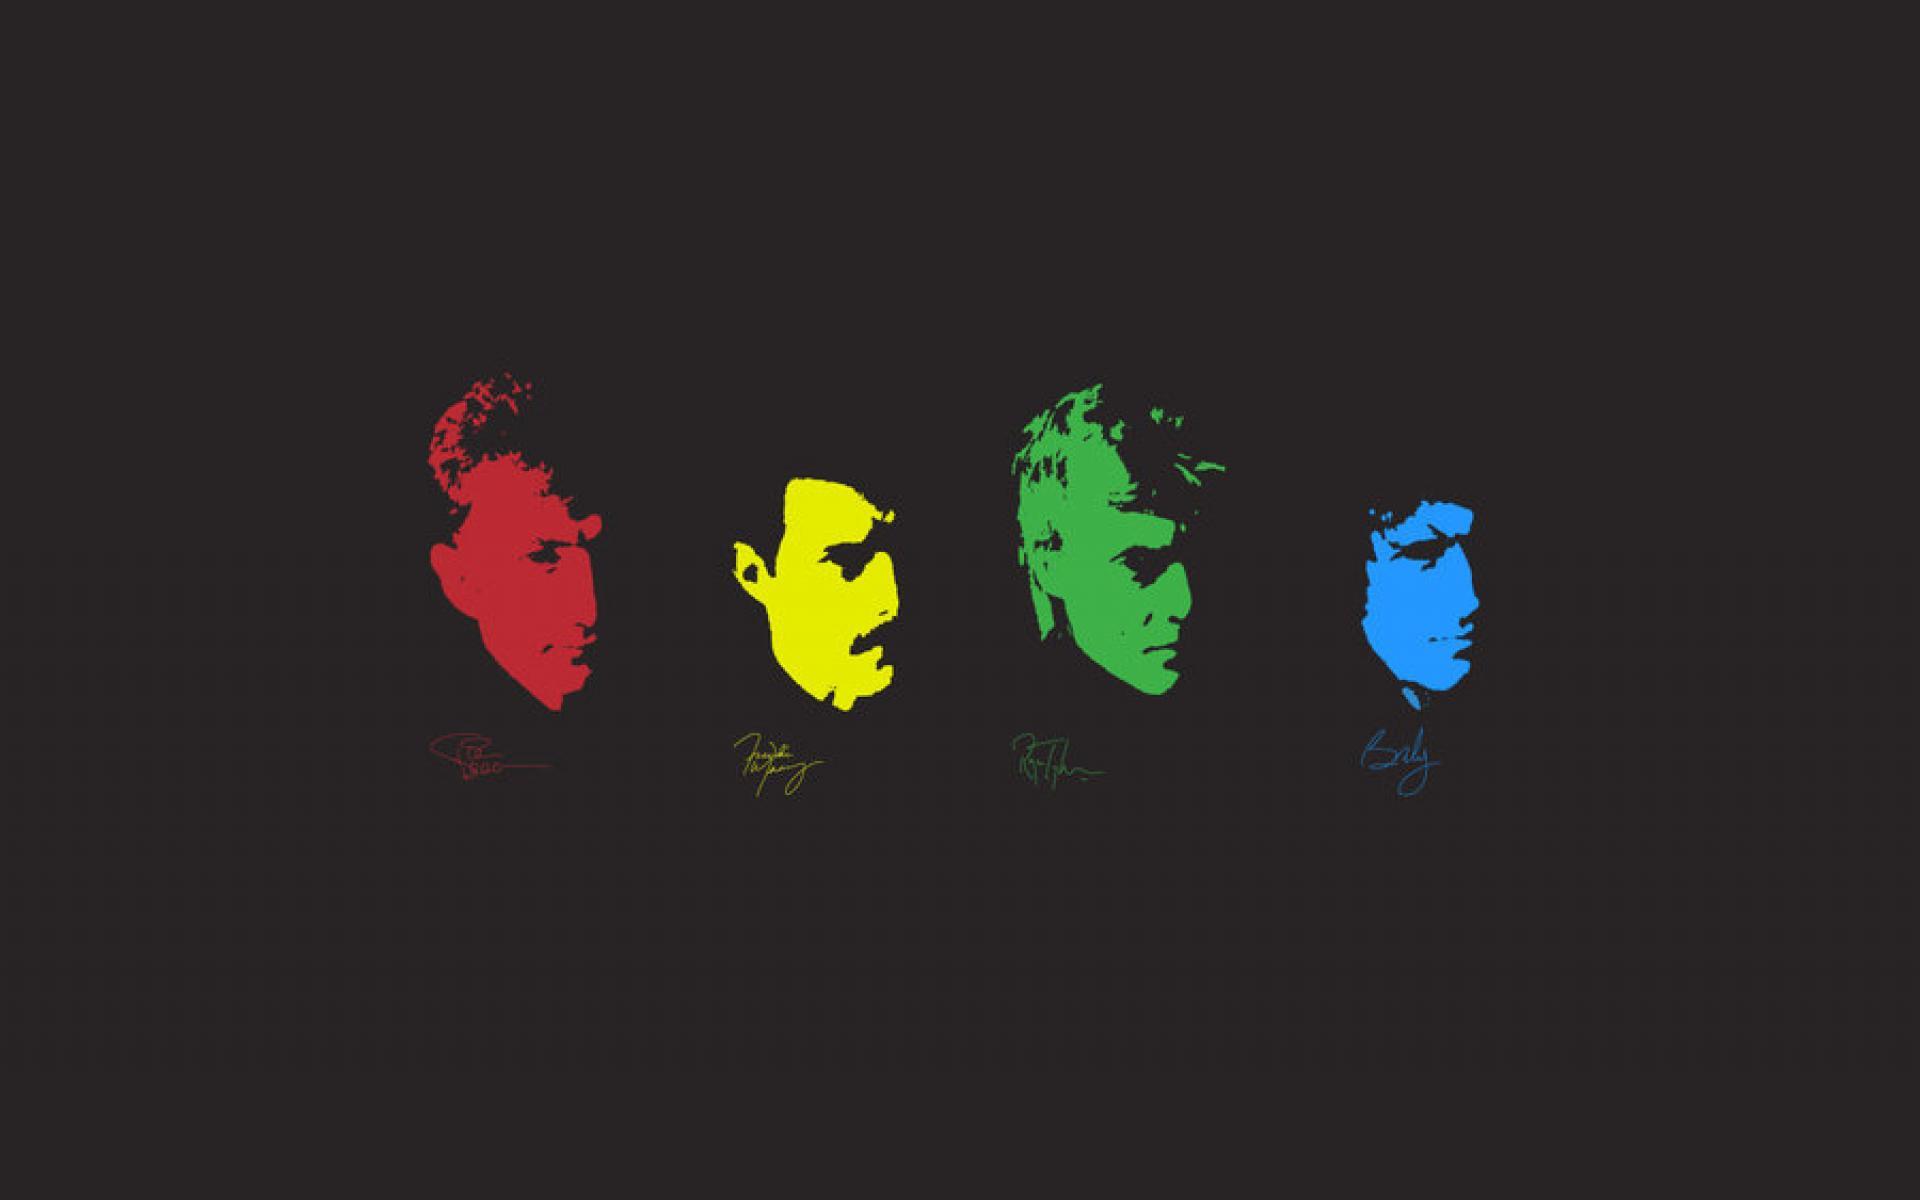 Queen Band Wallpapers  Top Free Queen Band Backgrounds  WallpaperAccess